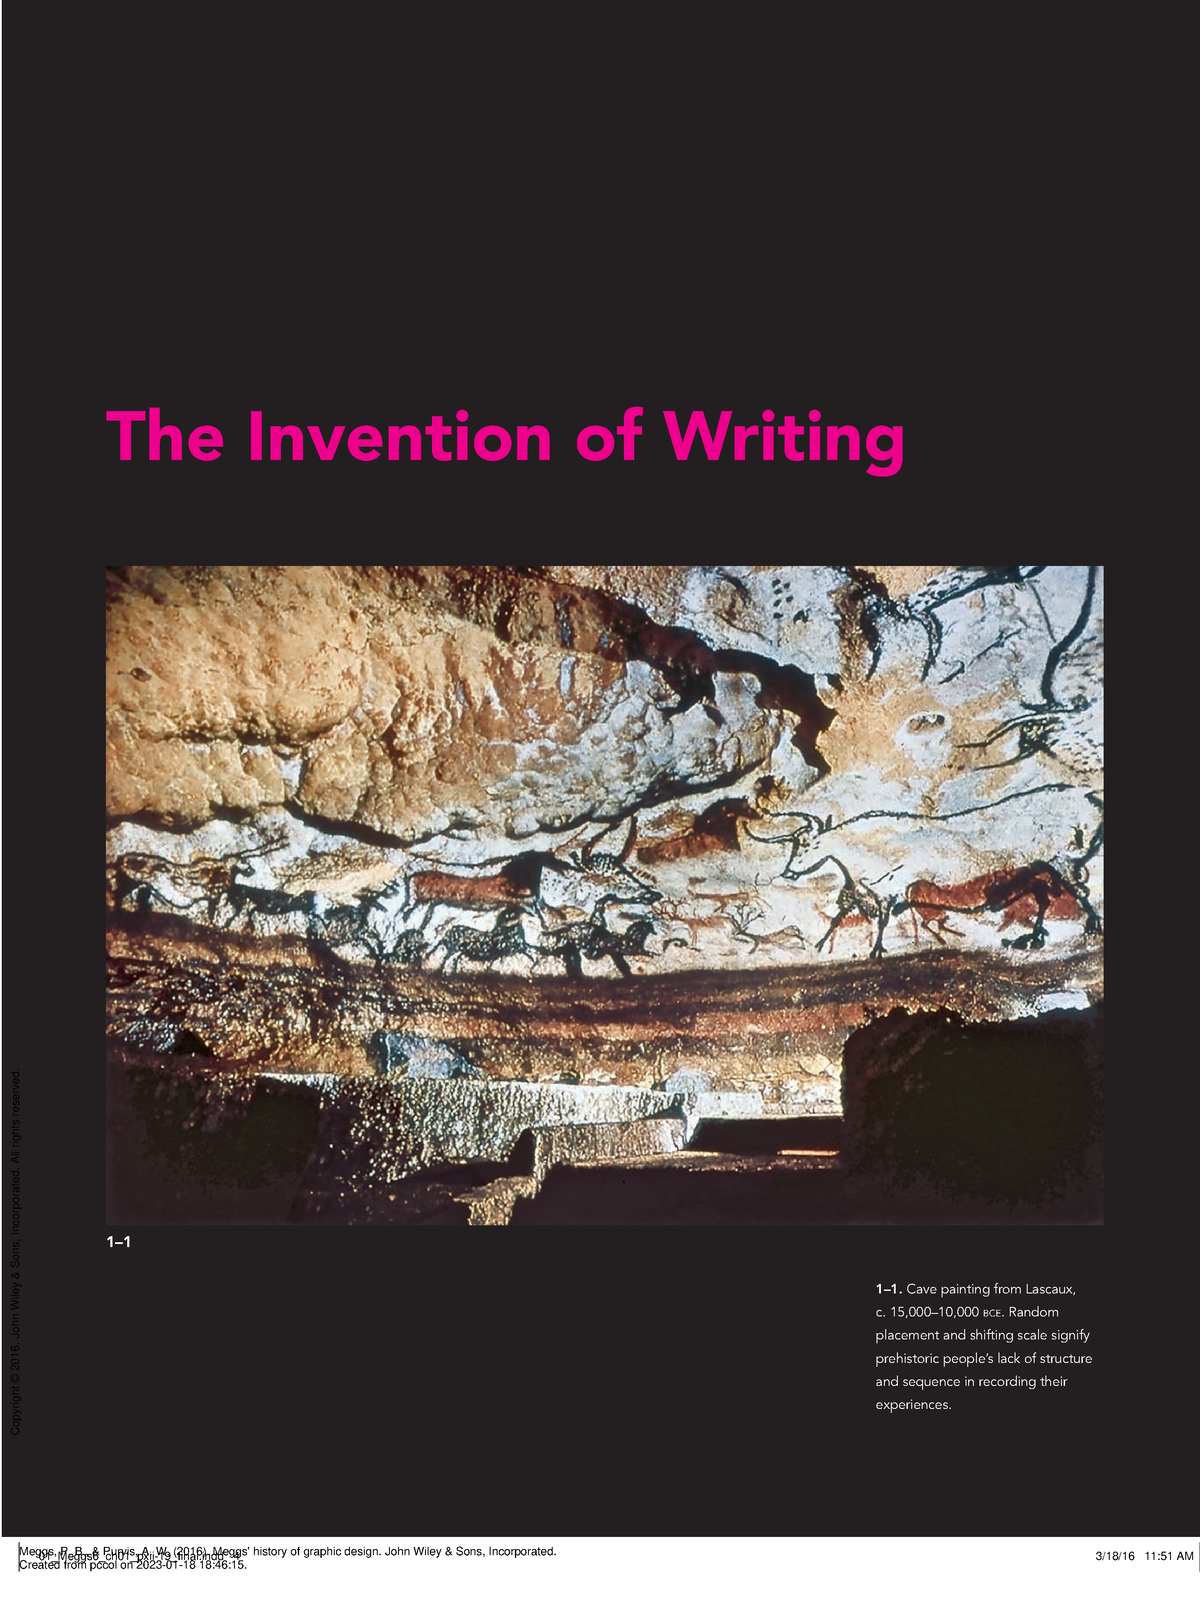 Meggs' History of Graphic Design - (1 The Invention of Writing)-2